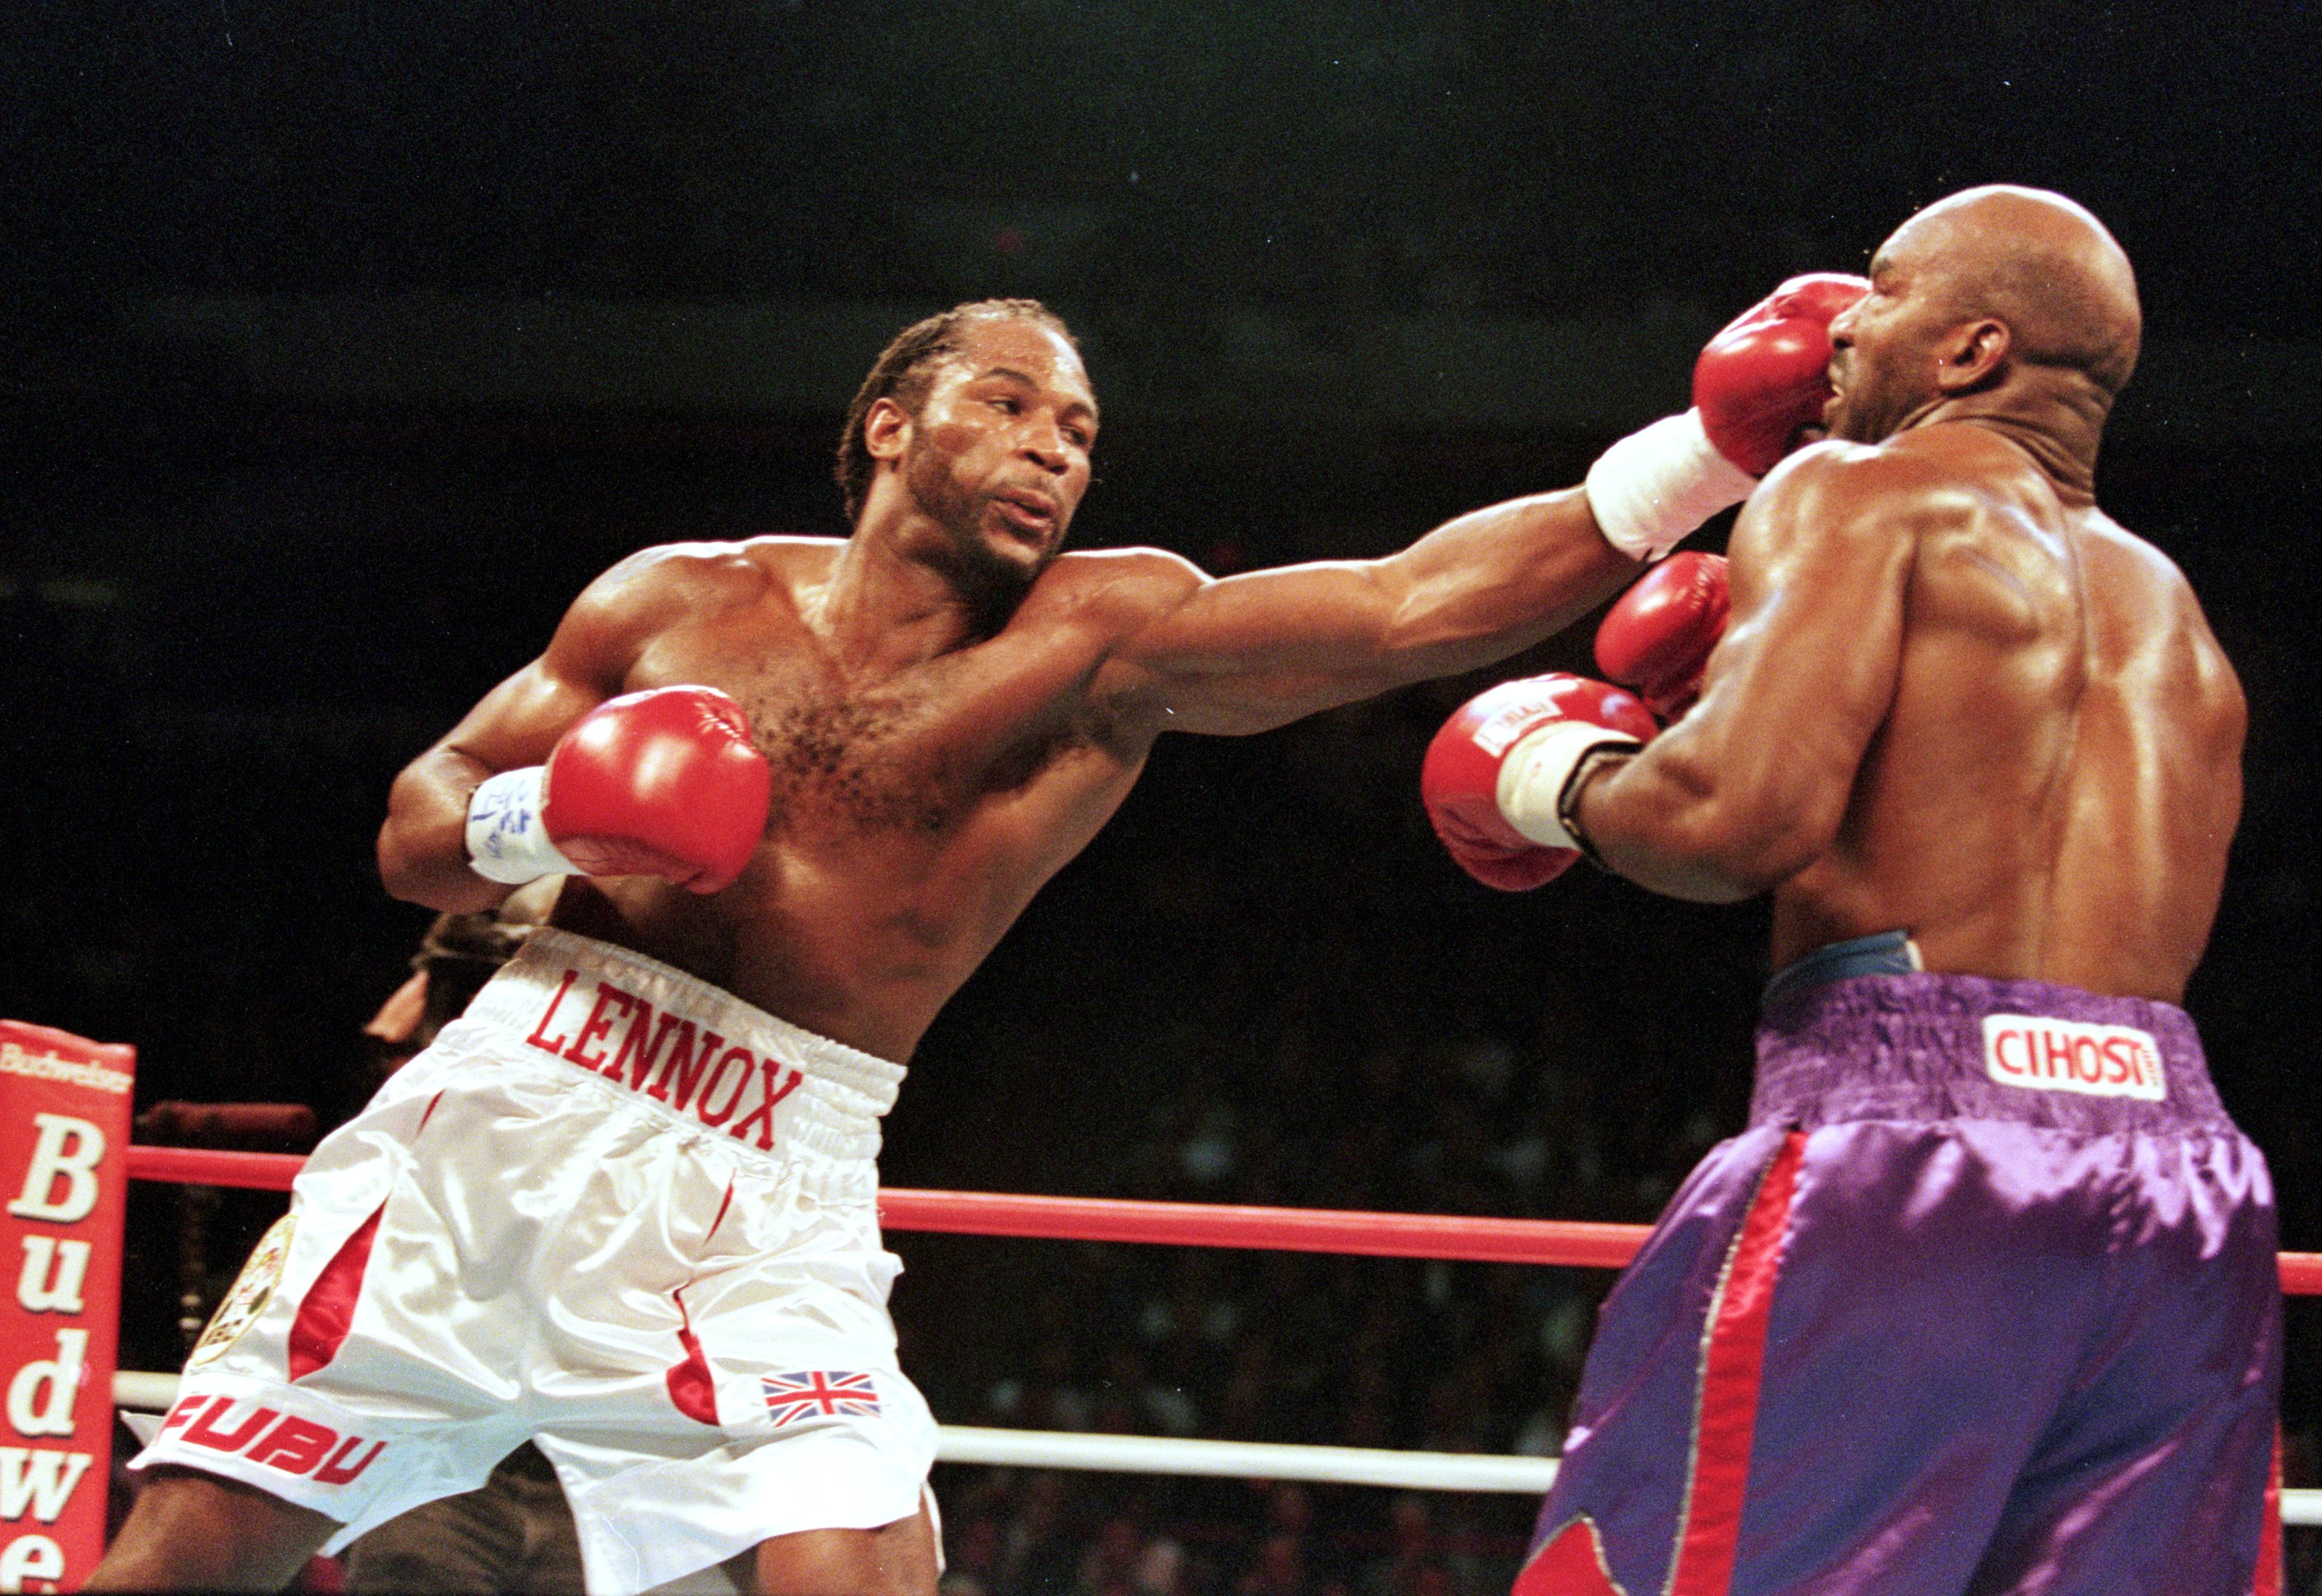 Boxing: Top 10 boxers in history according to The Ring